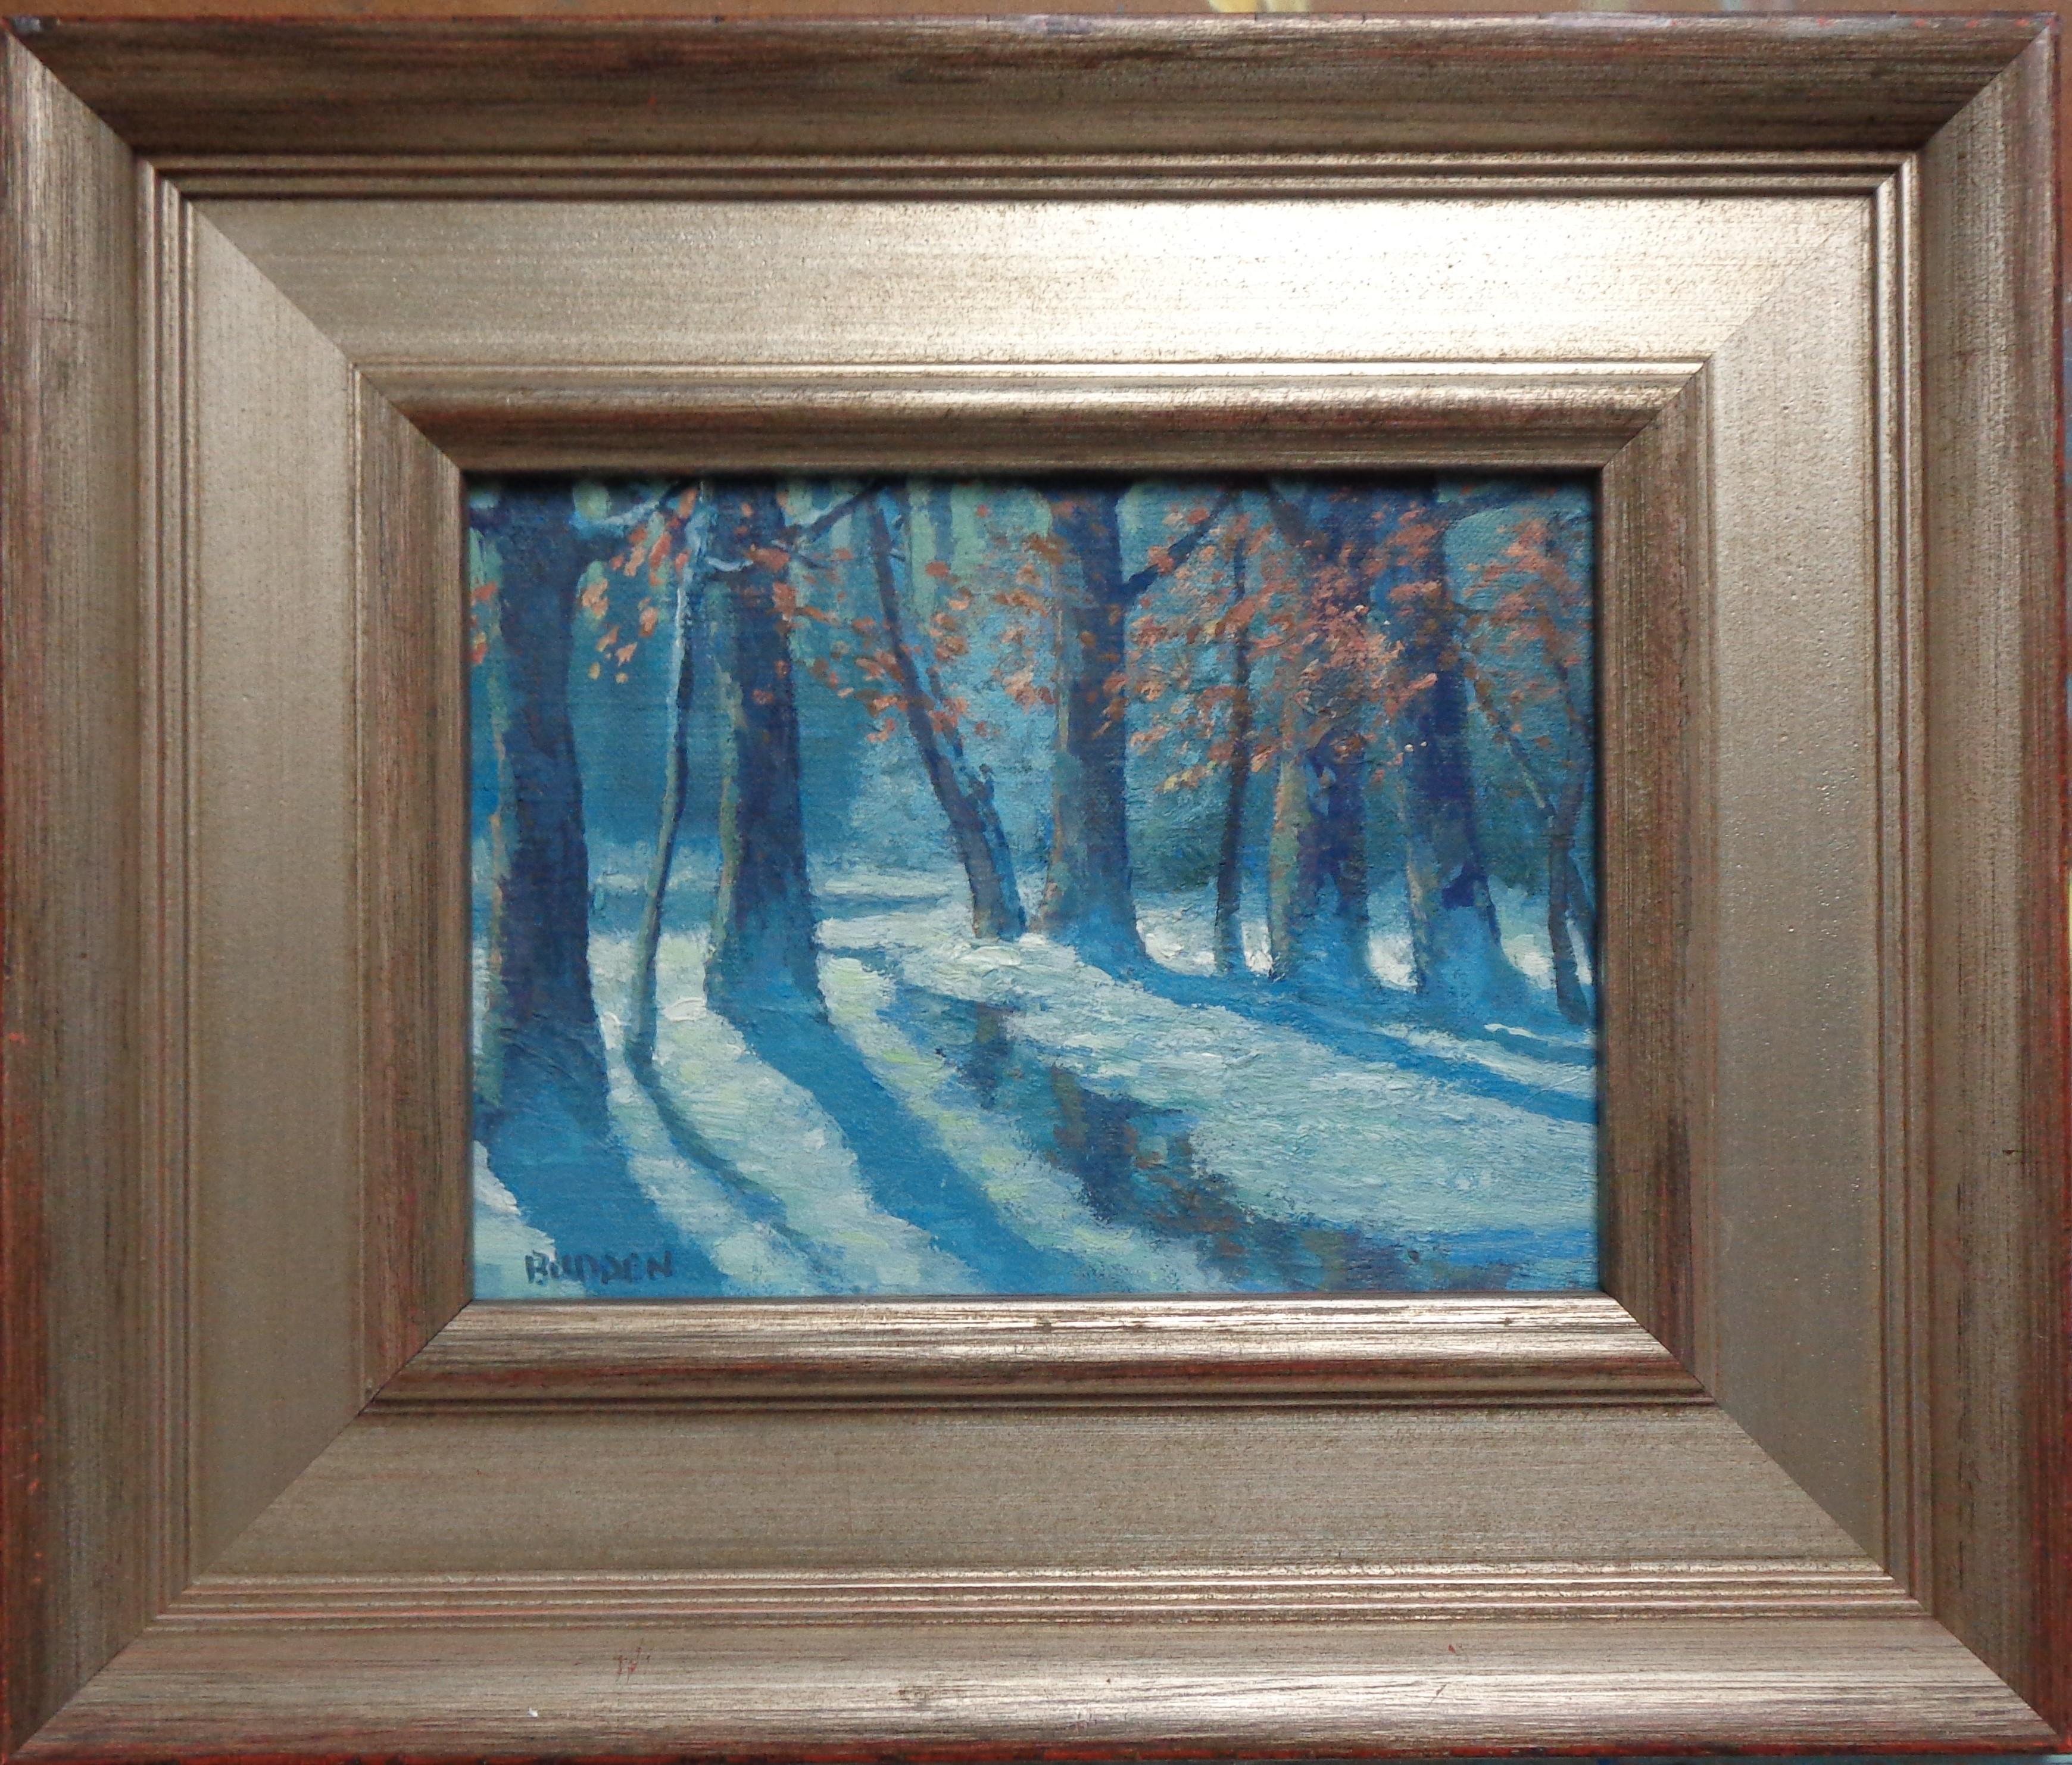 Winter Woods is a beautiful impressionistic winter landscape snow scene. The painting is on a canvas panel and exudes the rich qualities of oil paint with bright strong color, a variety of lost and found edges, visible brush work and a concentration